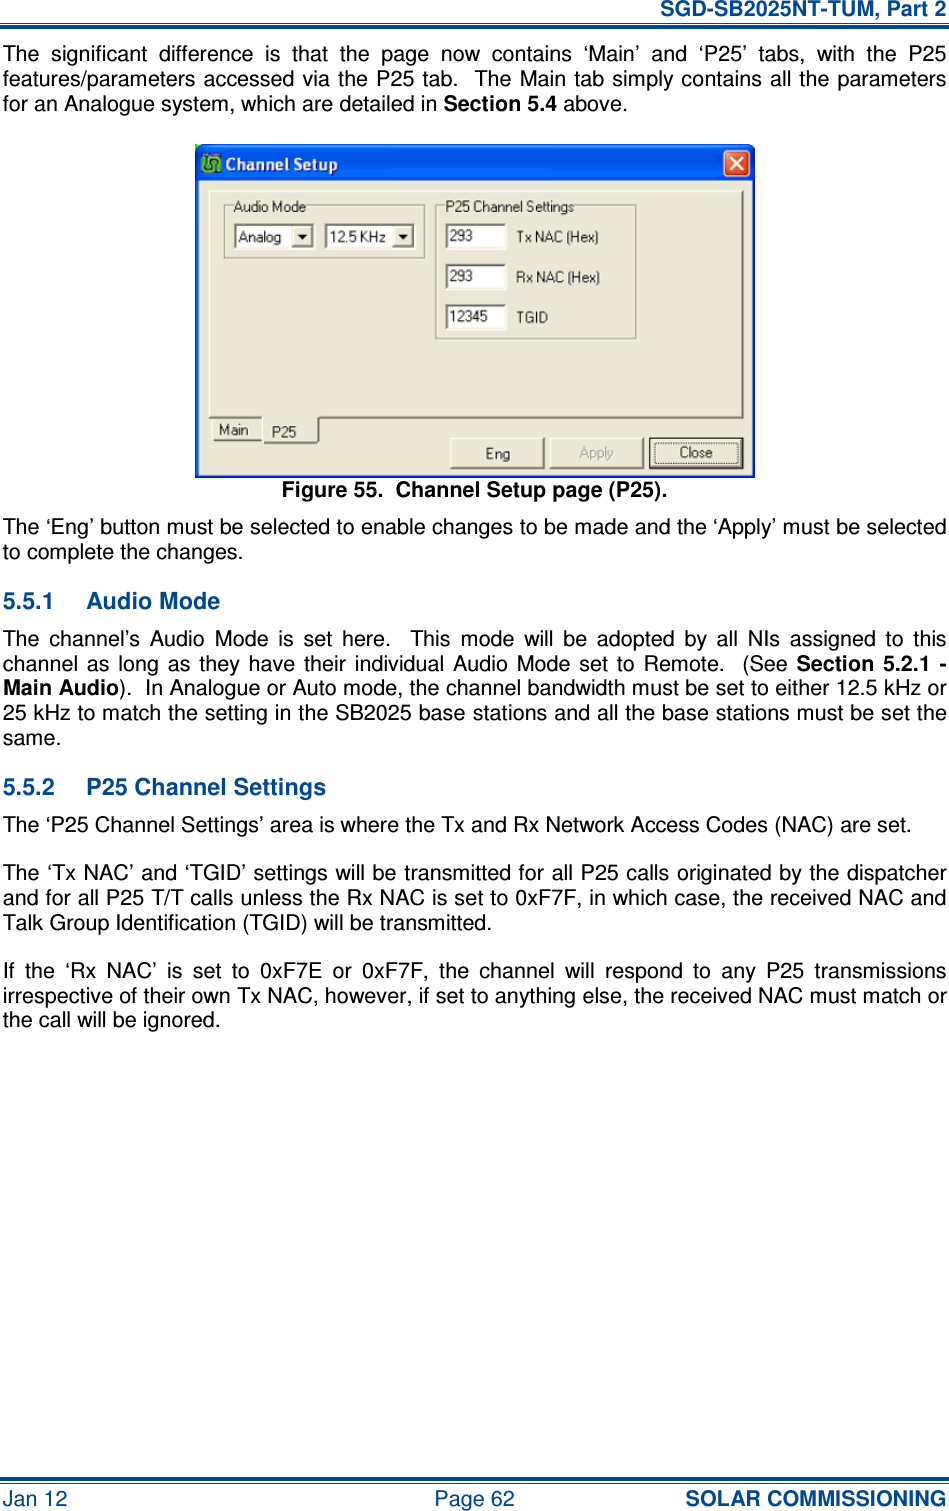   SGD-SB2025NT-TUM, Part 2 Jan 12  Page 62 SOLAR COMMISSIONING The  significant  difference  is  that  the  page  now  contains  ‘Main’  and  ‘P25’  tabs,  with  the  P25 features/parameters accessed via the P25 tab.  The Main tab simply contains all the parameters for an Analogue system, which are detailed in Section 5.4 above. Figure 55.  Channel Setup page (P25). The ‘Eng’ button must be selected to enable changes to be made and the ‘Apply’ must be selected to complete the changes. 5.5.1  Audio Mode The  channel’s  Audio  Mode  is  set  here.    This  mode  will  be  adopted  by  all  NIs  assigned  to  this channel as  long  as  they  have  their  individual  Audio  Mode set  to  Remote.   (See Section  5.2.1  - Main Audio).  In Analogue or Auto mode, the channel bandwidth must be set to either 12.5 kHz or 25 kHz to match the setting in the SB2025 base stations and all the base stations must be set the same. 5.5.2  P25 Channel Settings The ‘P25 Channel Settings’ area is where the Tx and Rx Network Access Codes (NAC) are set. The ‘Tx NAC’ and ‘TGID’ settings will be transmitted for all P25 calls originated by the dispatcher and for all P25 T/T calls unless the Rx NAC is set to 0xF7F, in which case, the received NAC and Talk Group Identification (TGID) will be transmitted. If  the  ‘Rx  NAC’  is  set  to  0xF7E  or  0xF7F,  the  channel  will  respond  to  any  P25  transmissions irrespective of their own Tx NAC, however, if set to anything else, the received NAC must match or the call will be ignored.     